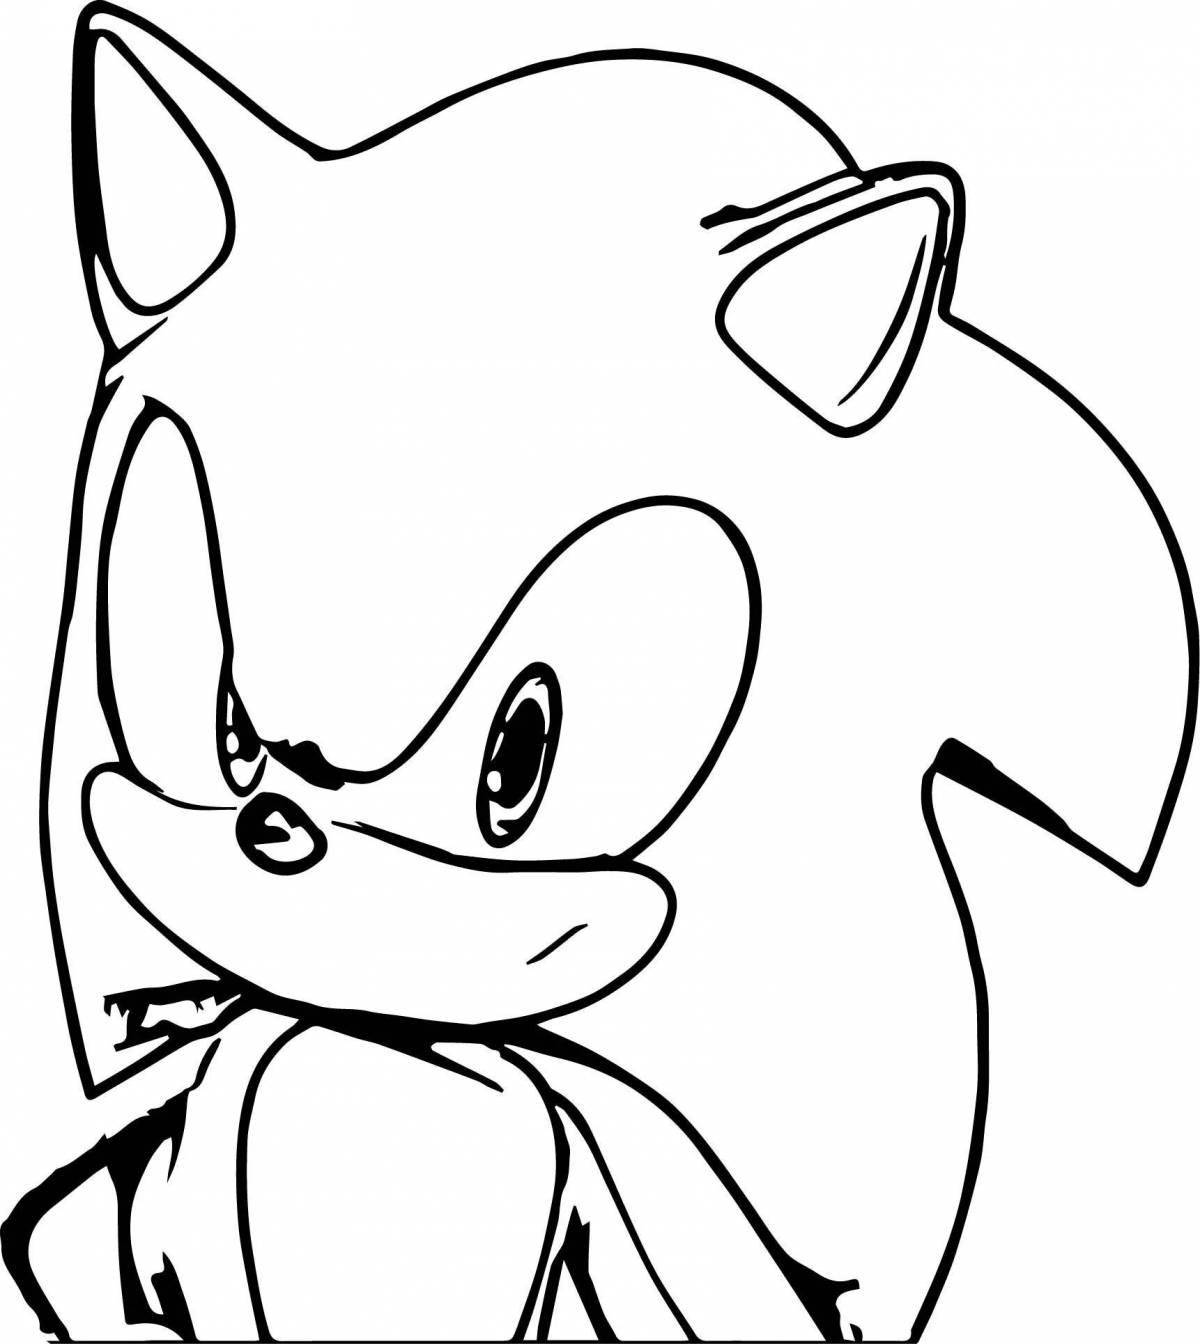 Super sonic exe comic coloring book